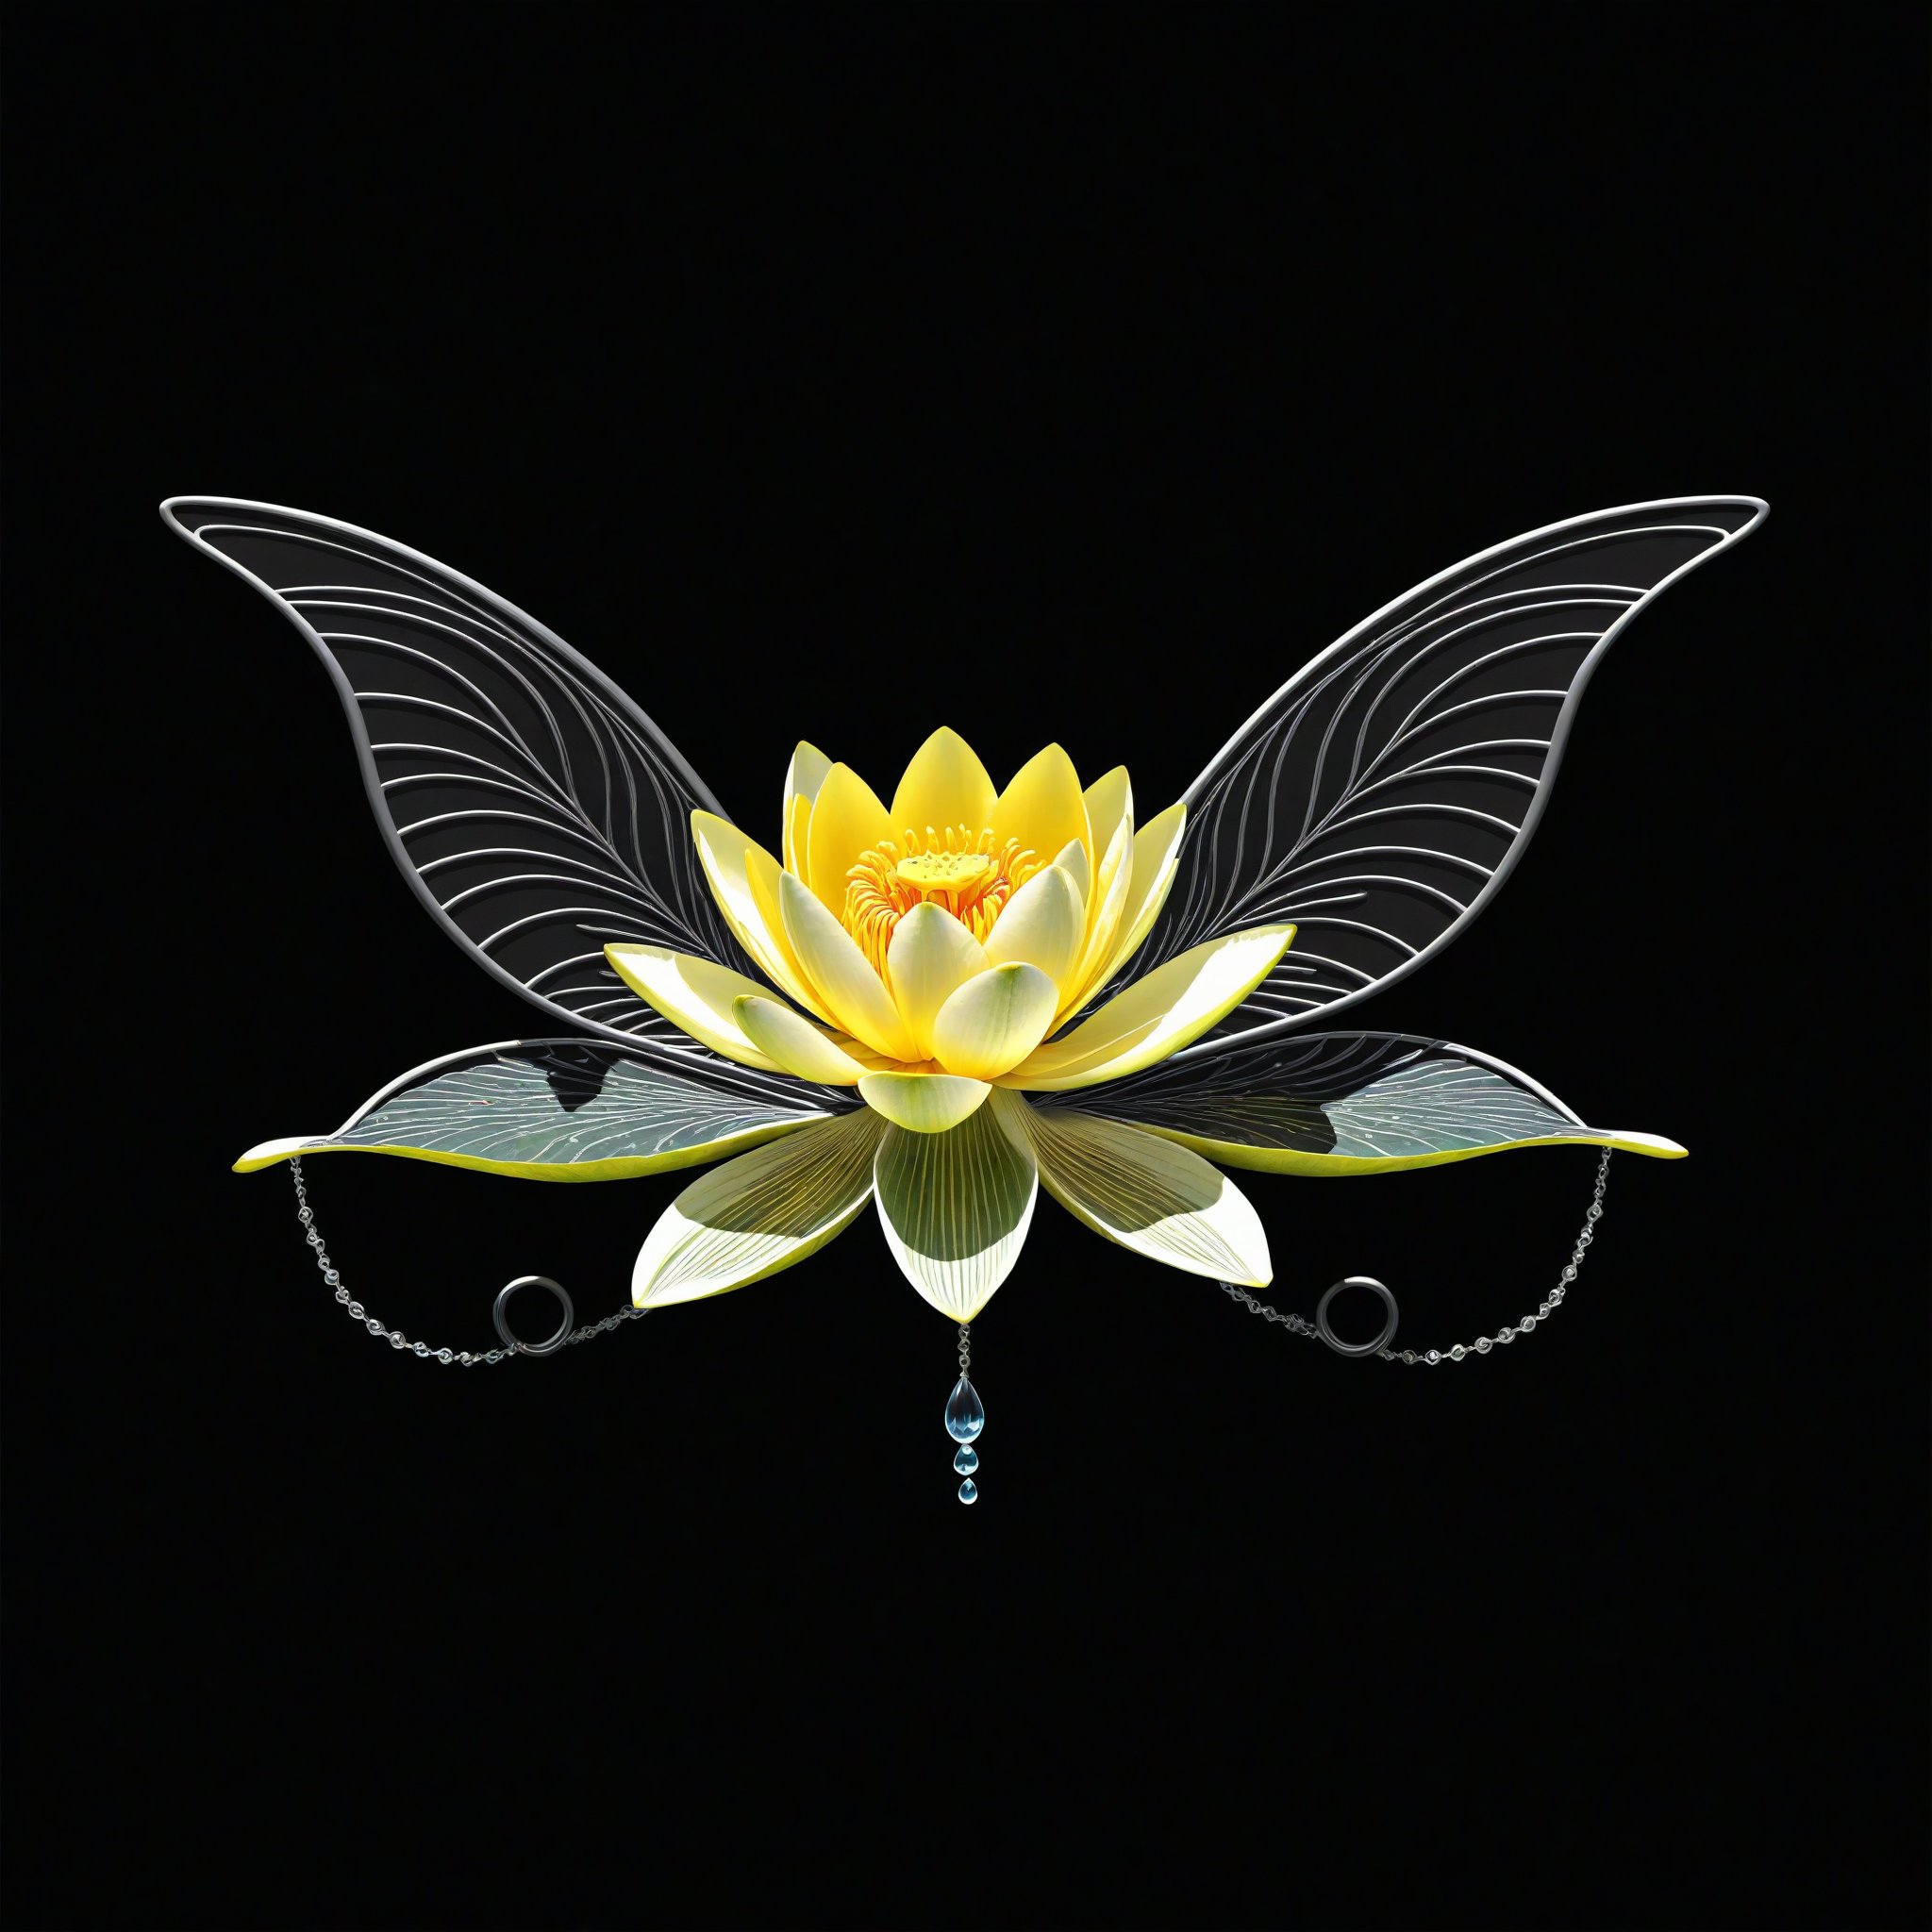 a water lily flower whit wing majestic with clasic ornament Mechanical lines Elegance T-shirt design, BLACK BACKGROUND